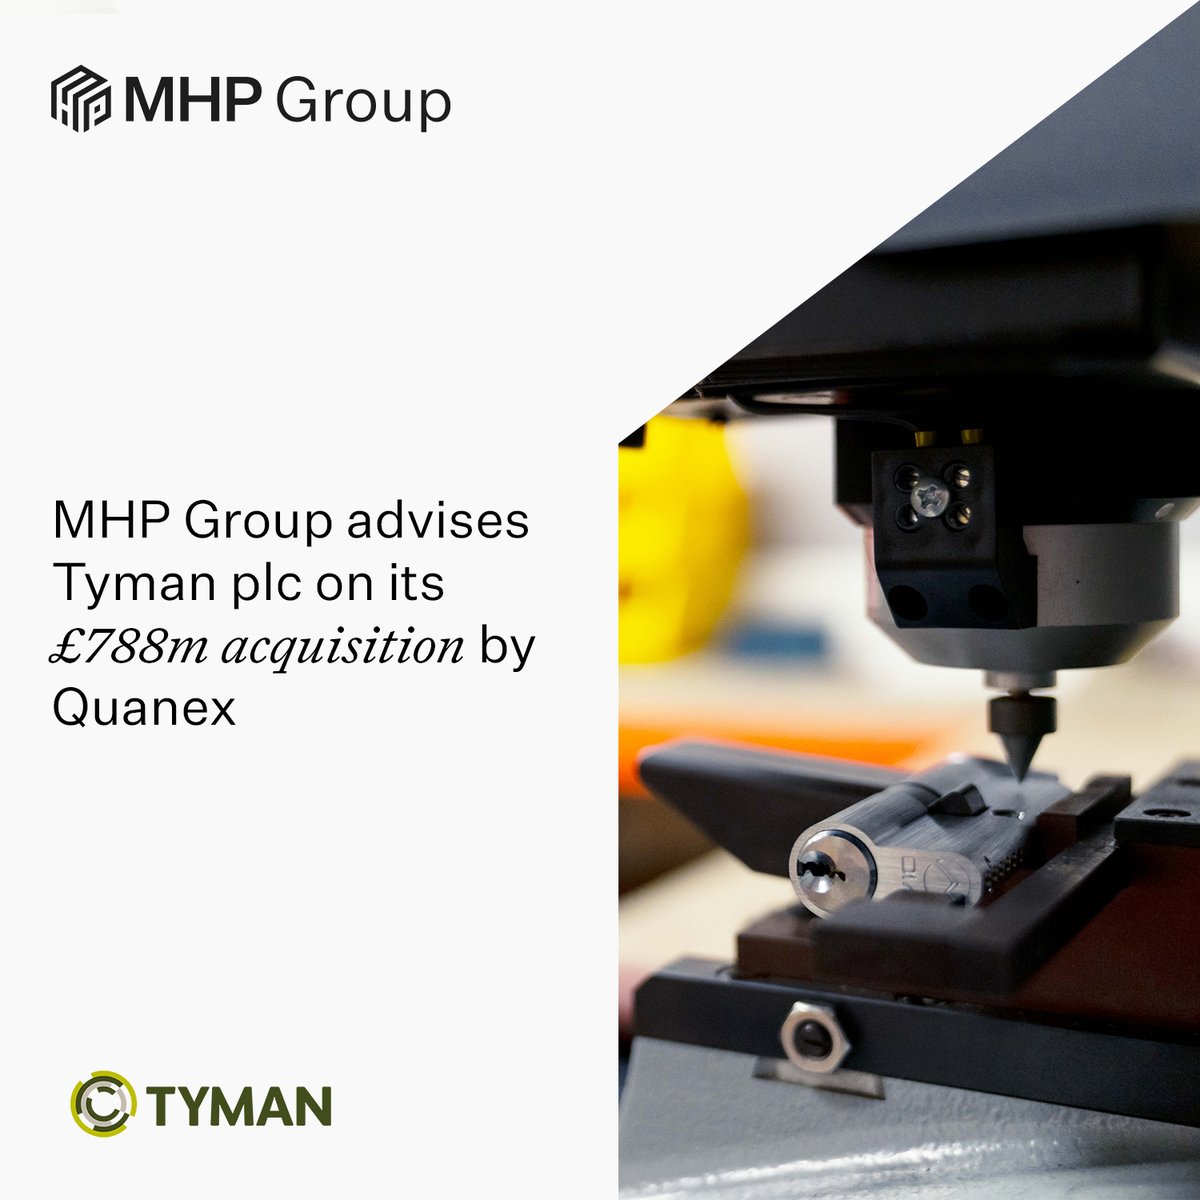 Our Corporate Advisory & Capital Markets team this week advised our FTSE 250 client, @TymanPlc, on its recommended cash and share offer from NYSE listed Quanex, valued at £788m. The core MHP team of Reg Hoare, Rachel Farrington, Matthew Taylor and Christian Harte worked…